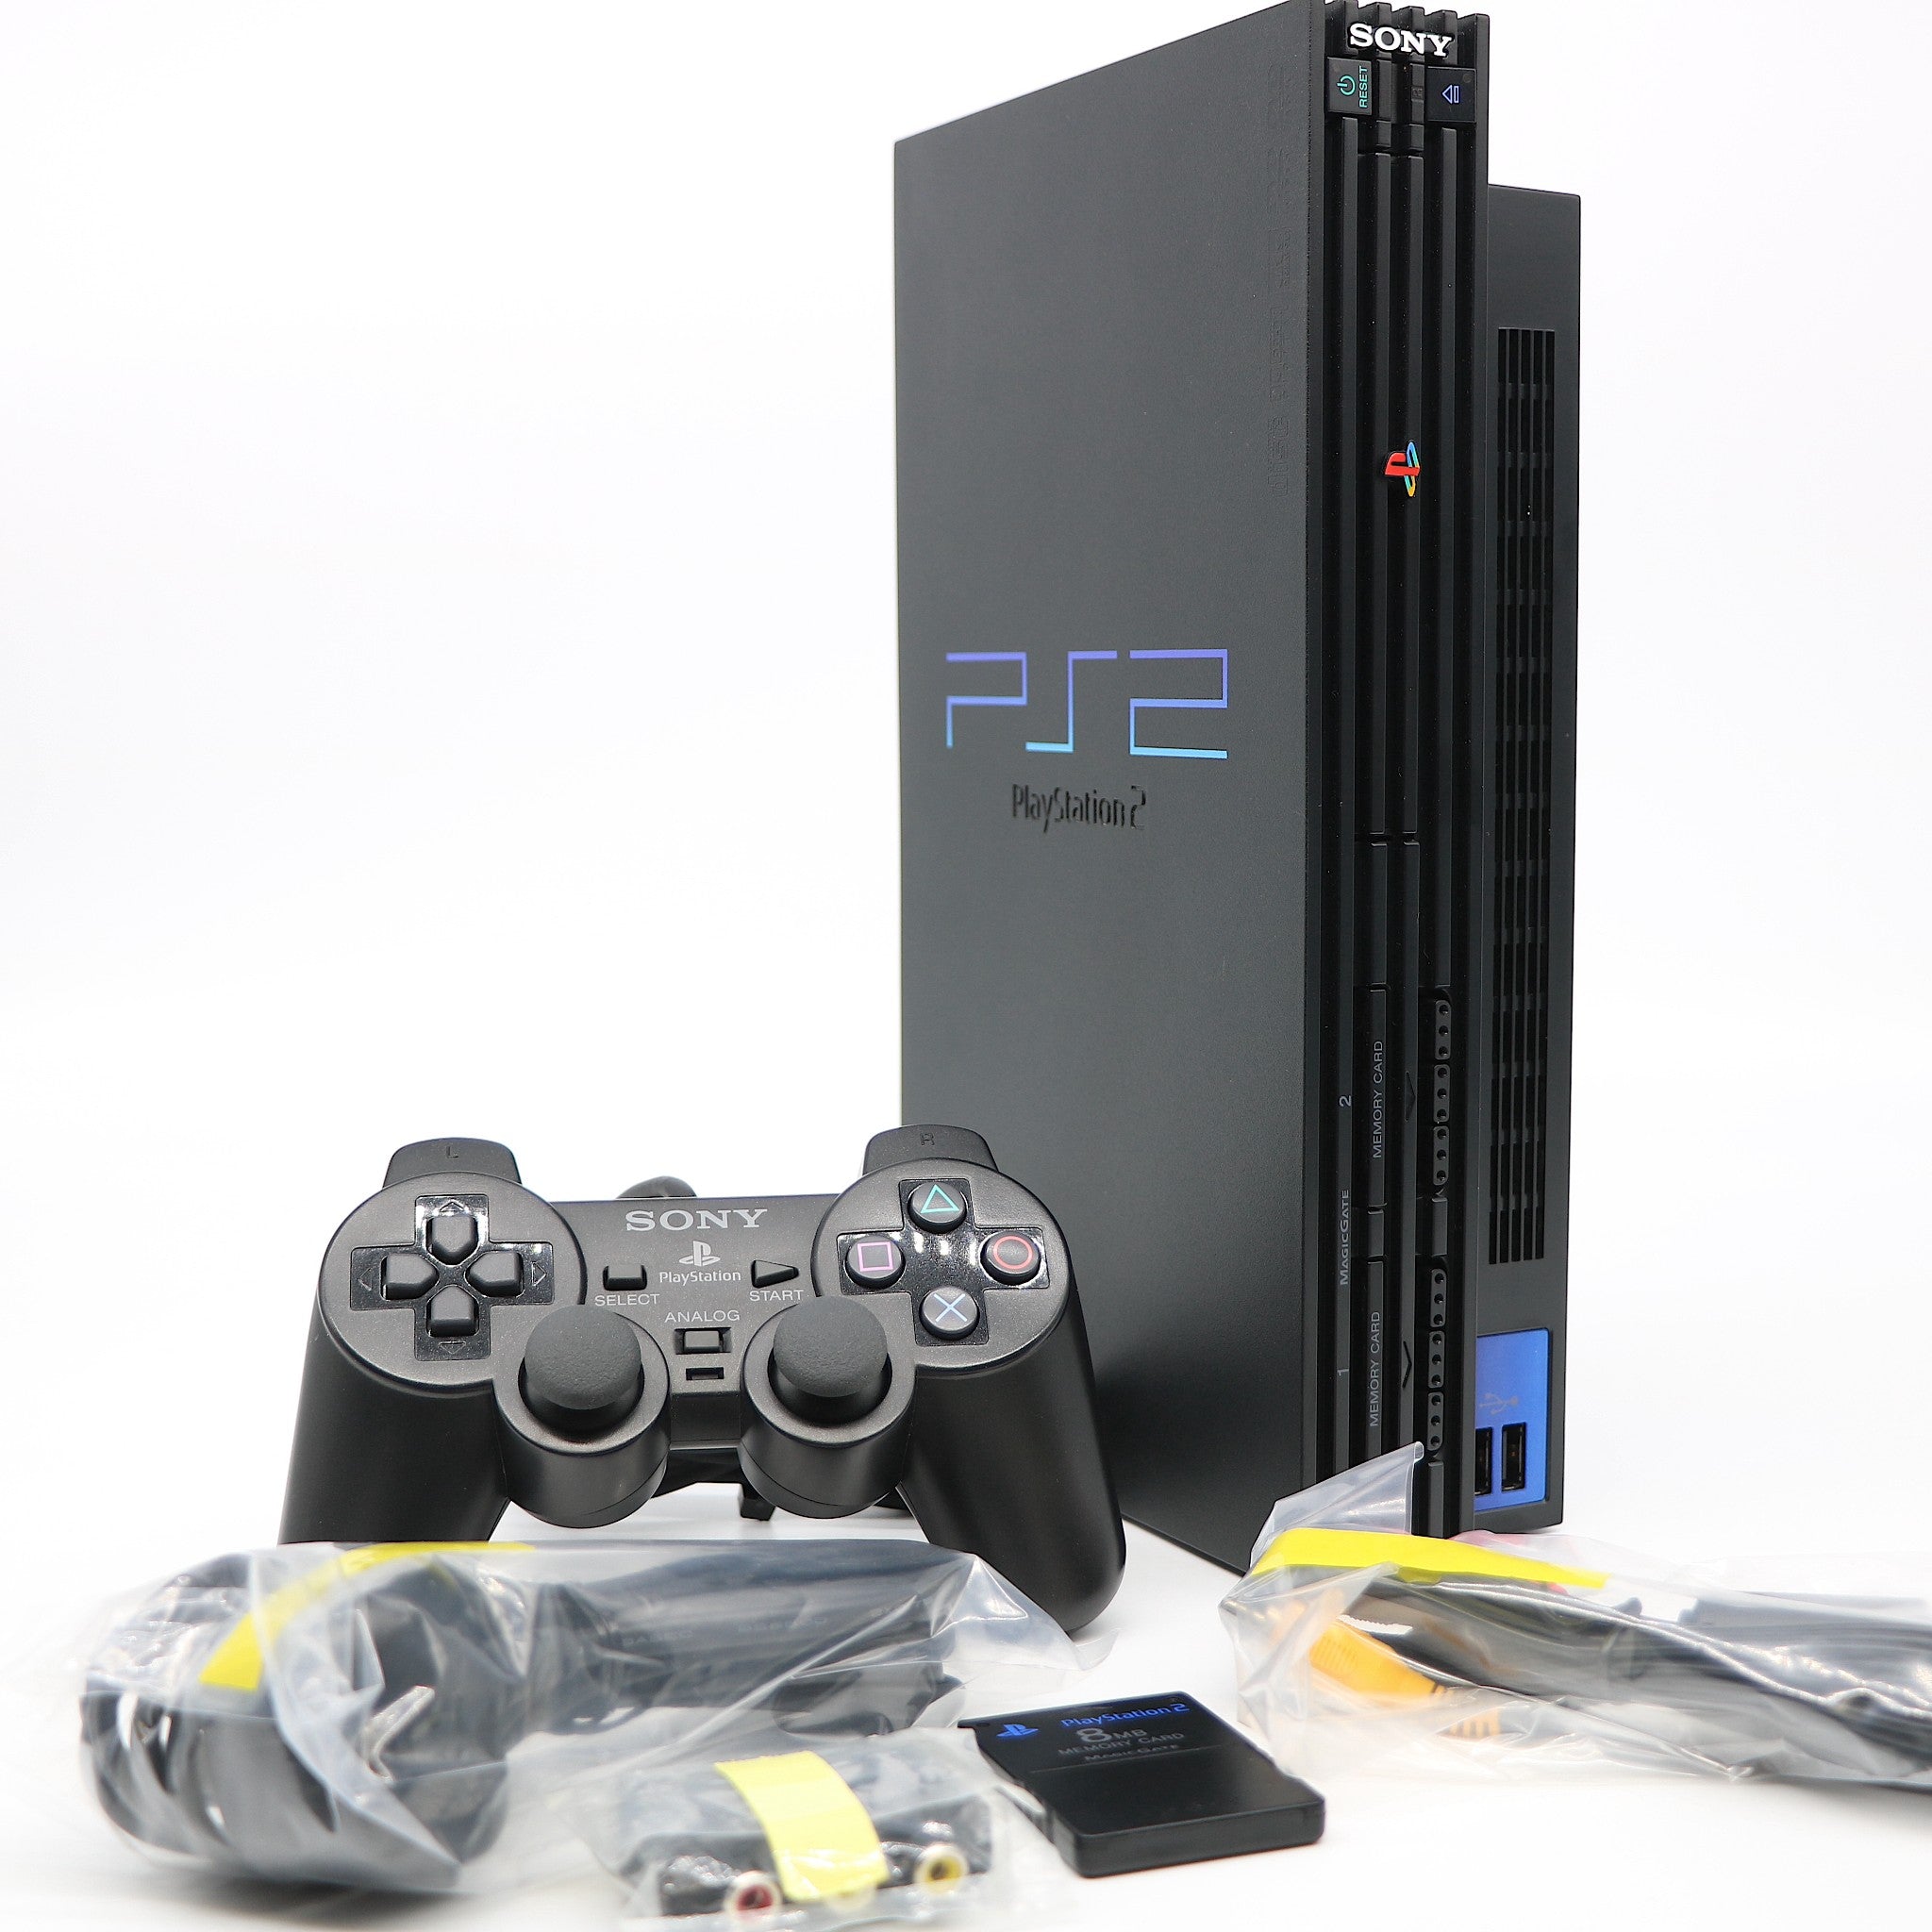 Restored Playstation 2 FAT Console with 8MB Memory Card (Refurbished)